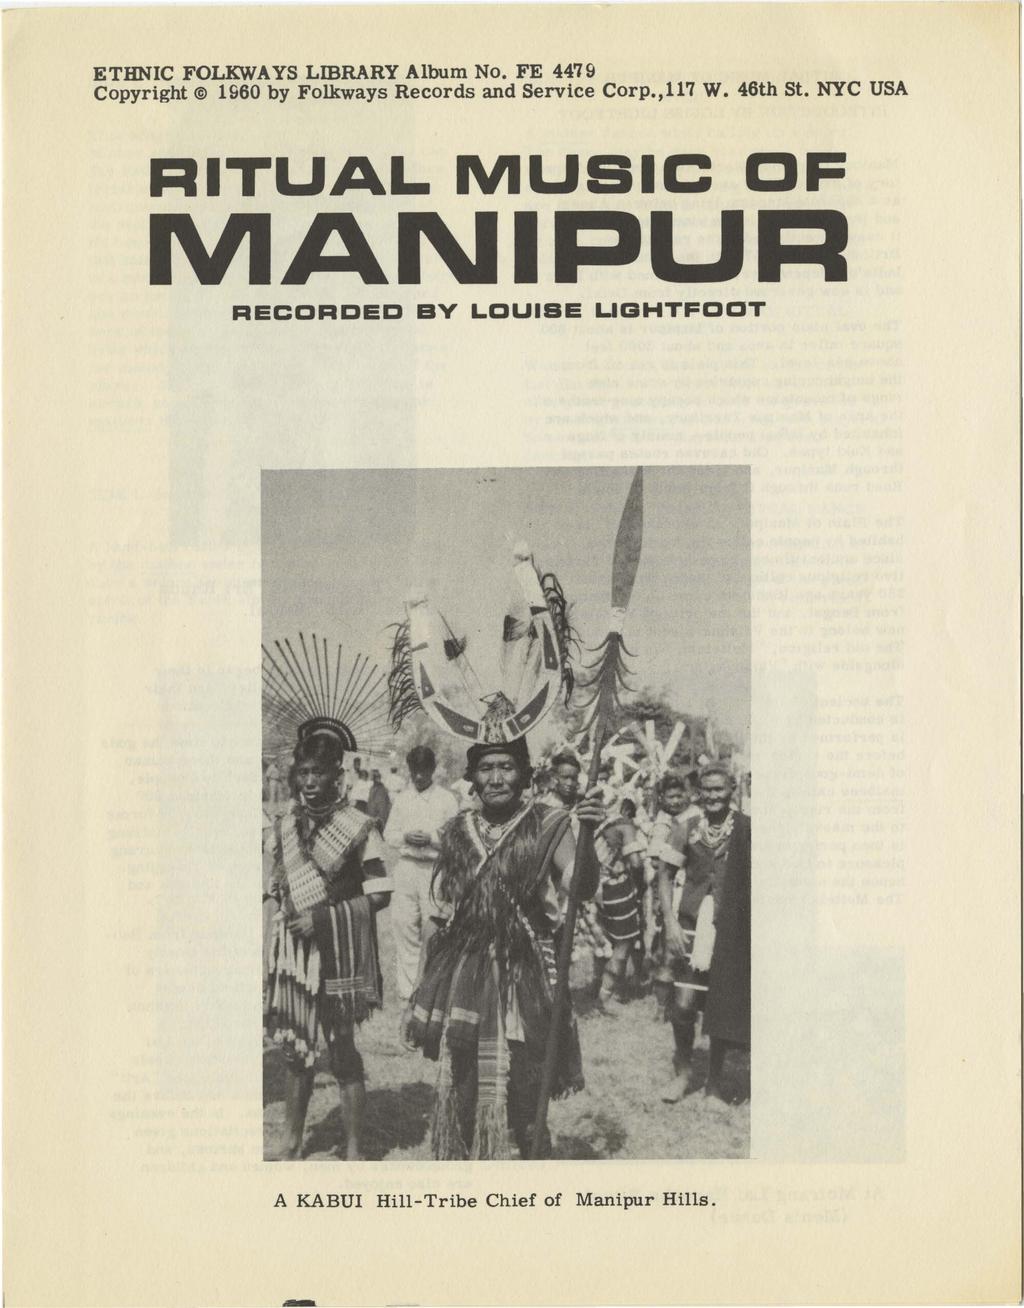 ETHNIC FOLKWAYS LmRARY Album No. FE 4479 Copyright @ 1960 by Folkways Records and Service Corp., 117 W.